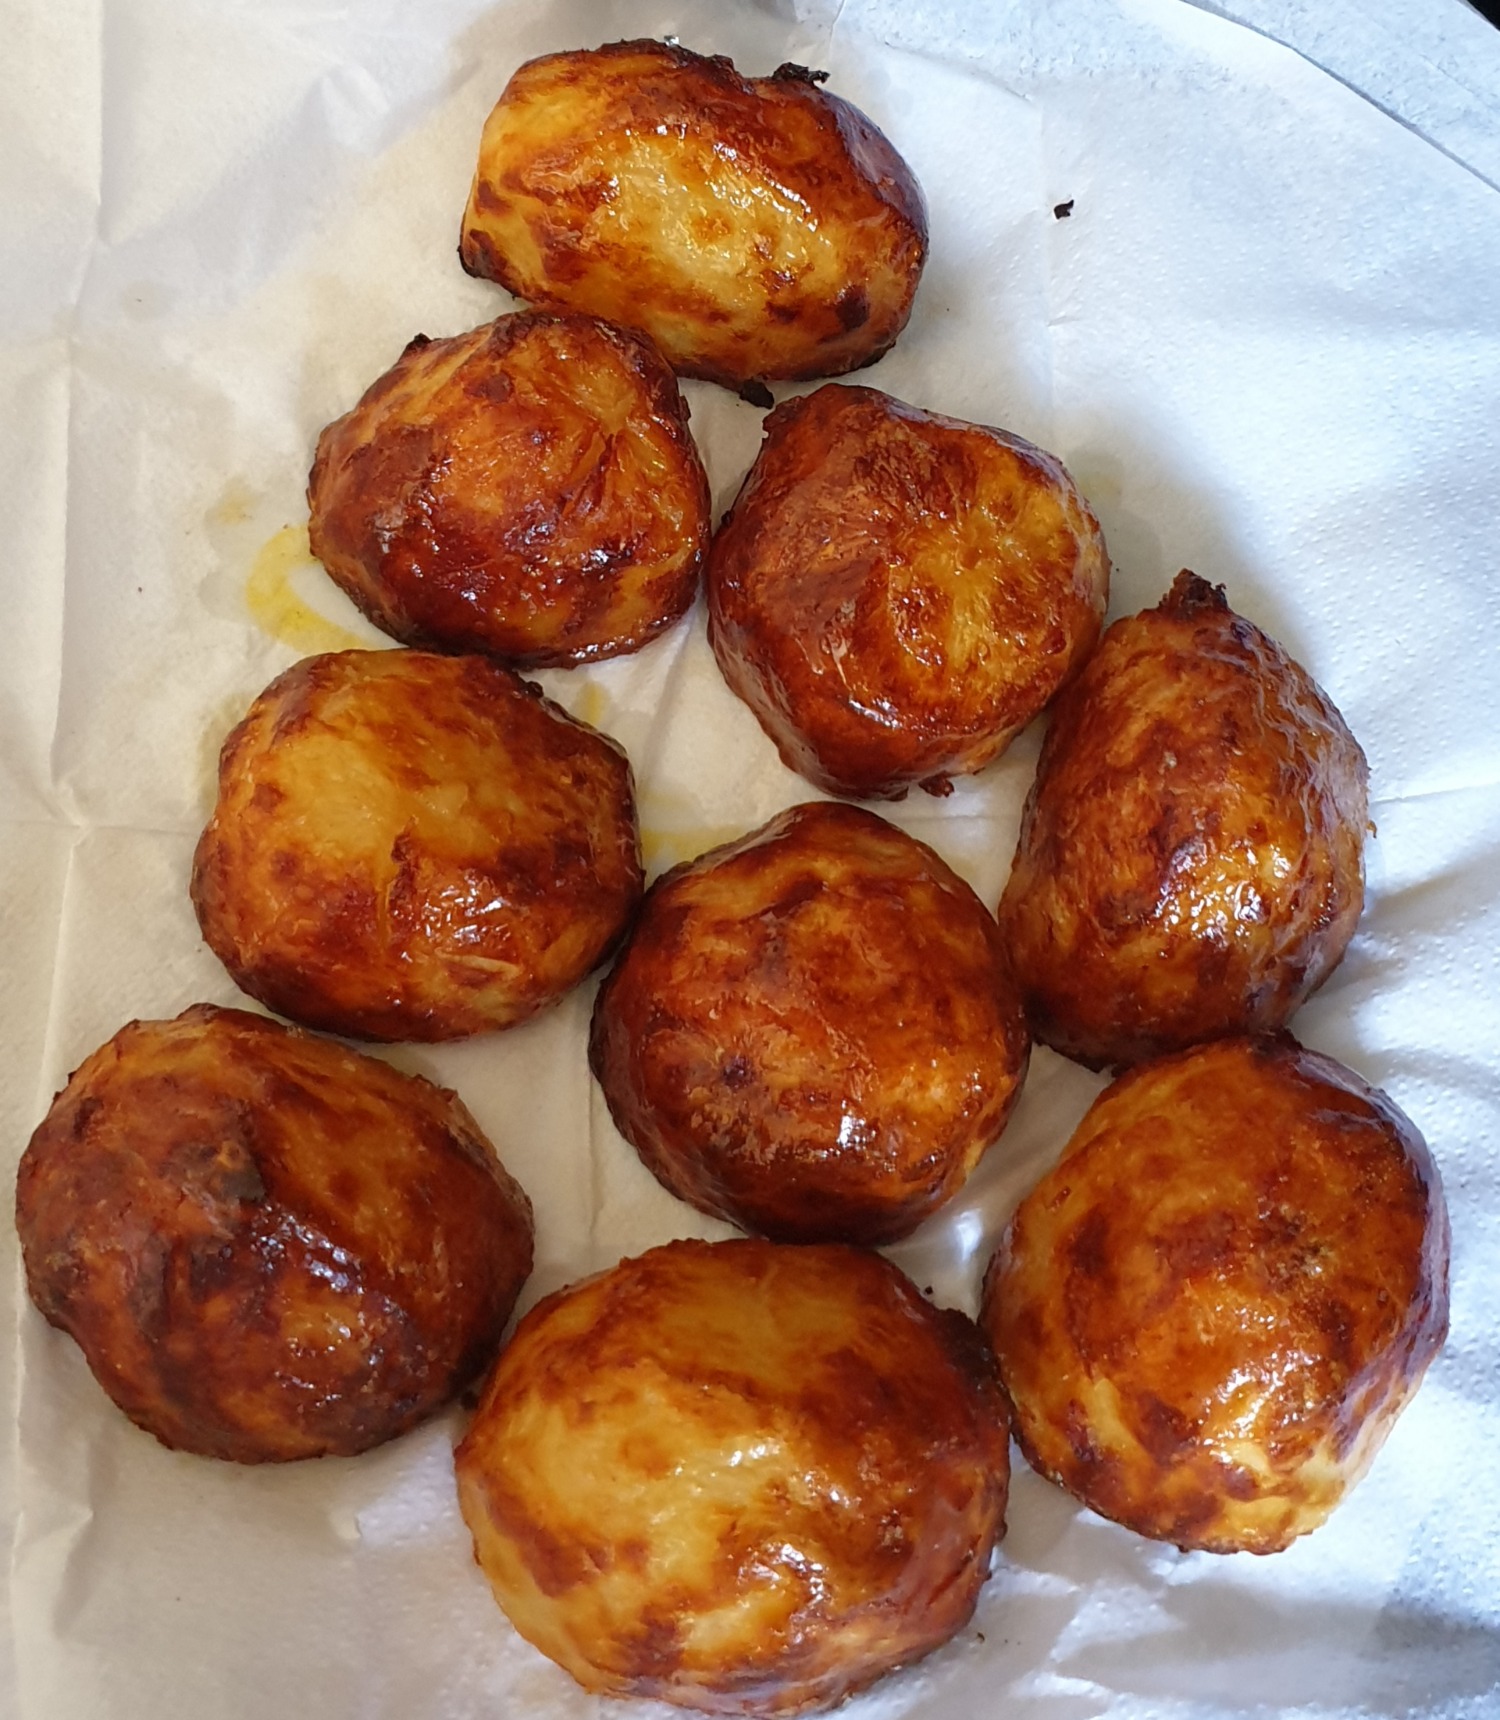 Halogen Baked Roasted New Potatoes - Feed Your Family for £20 a week